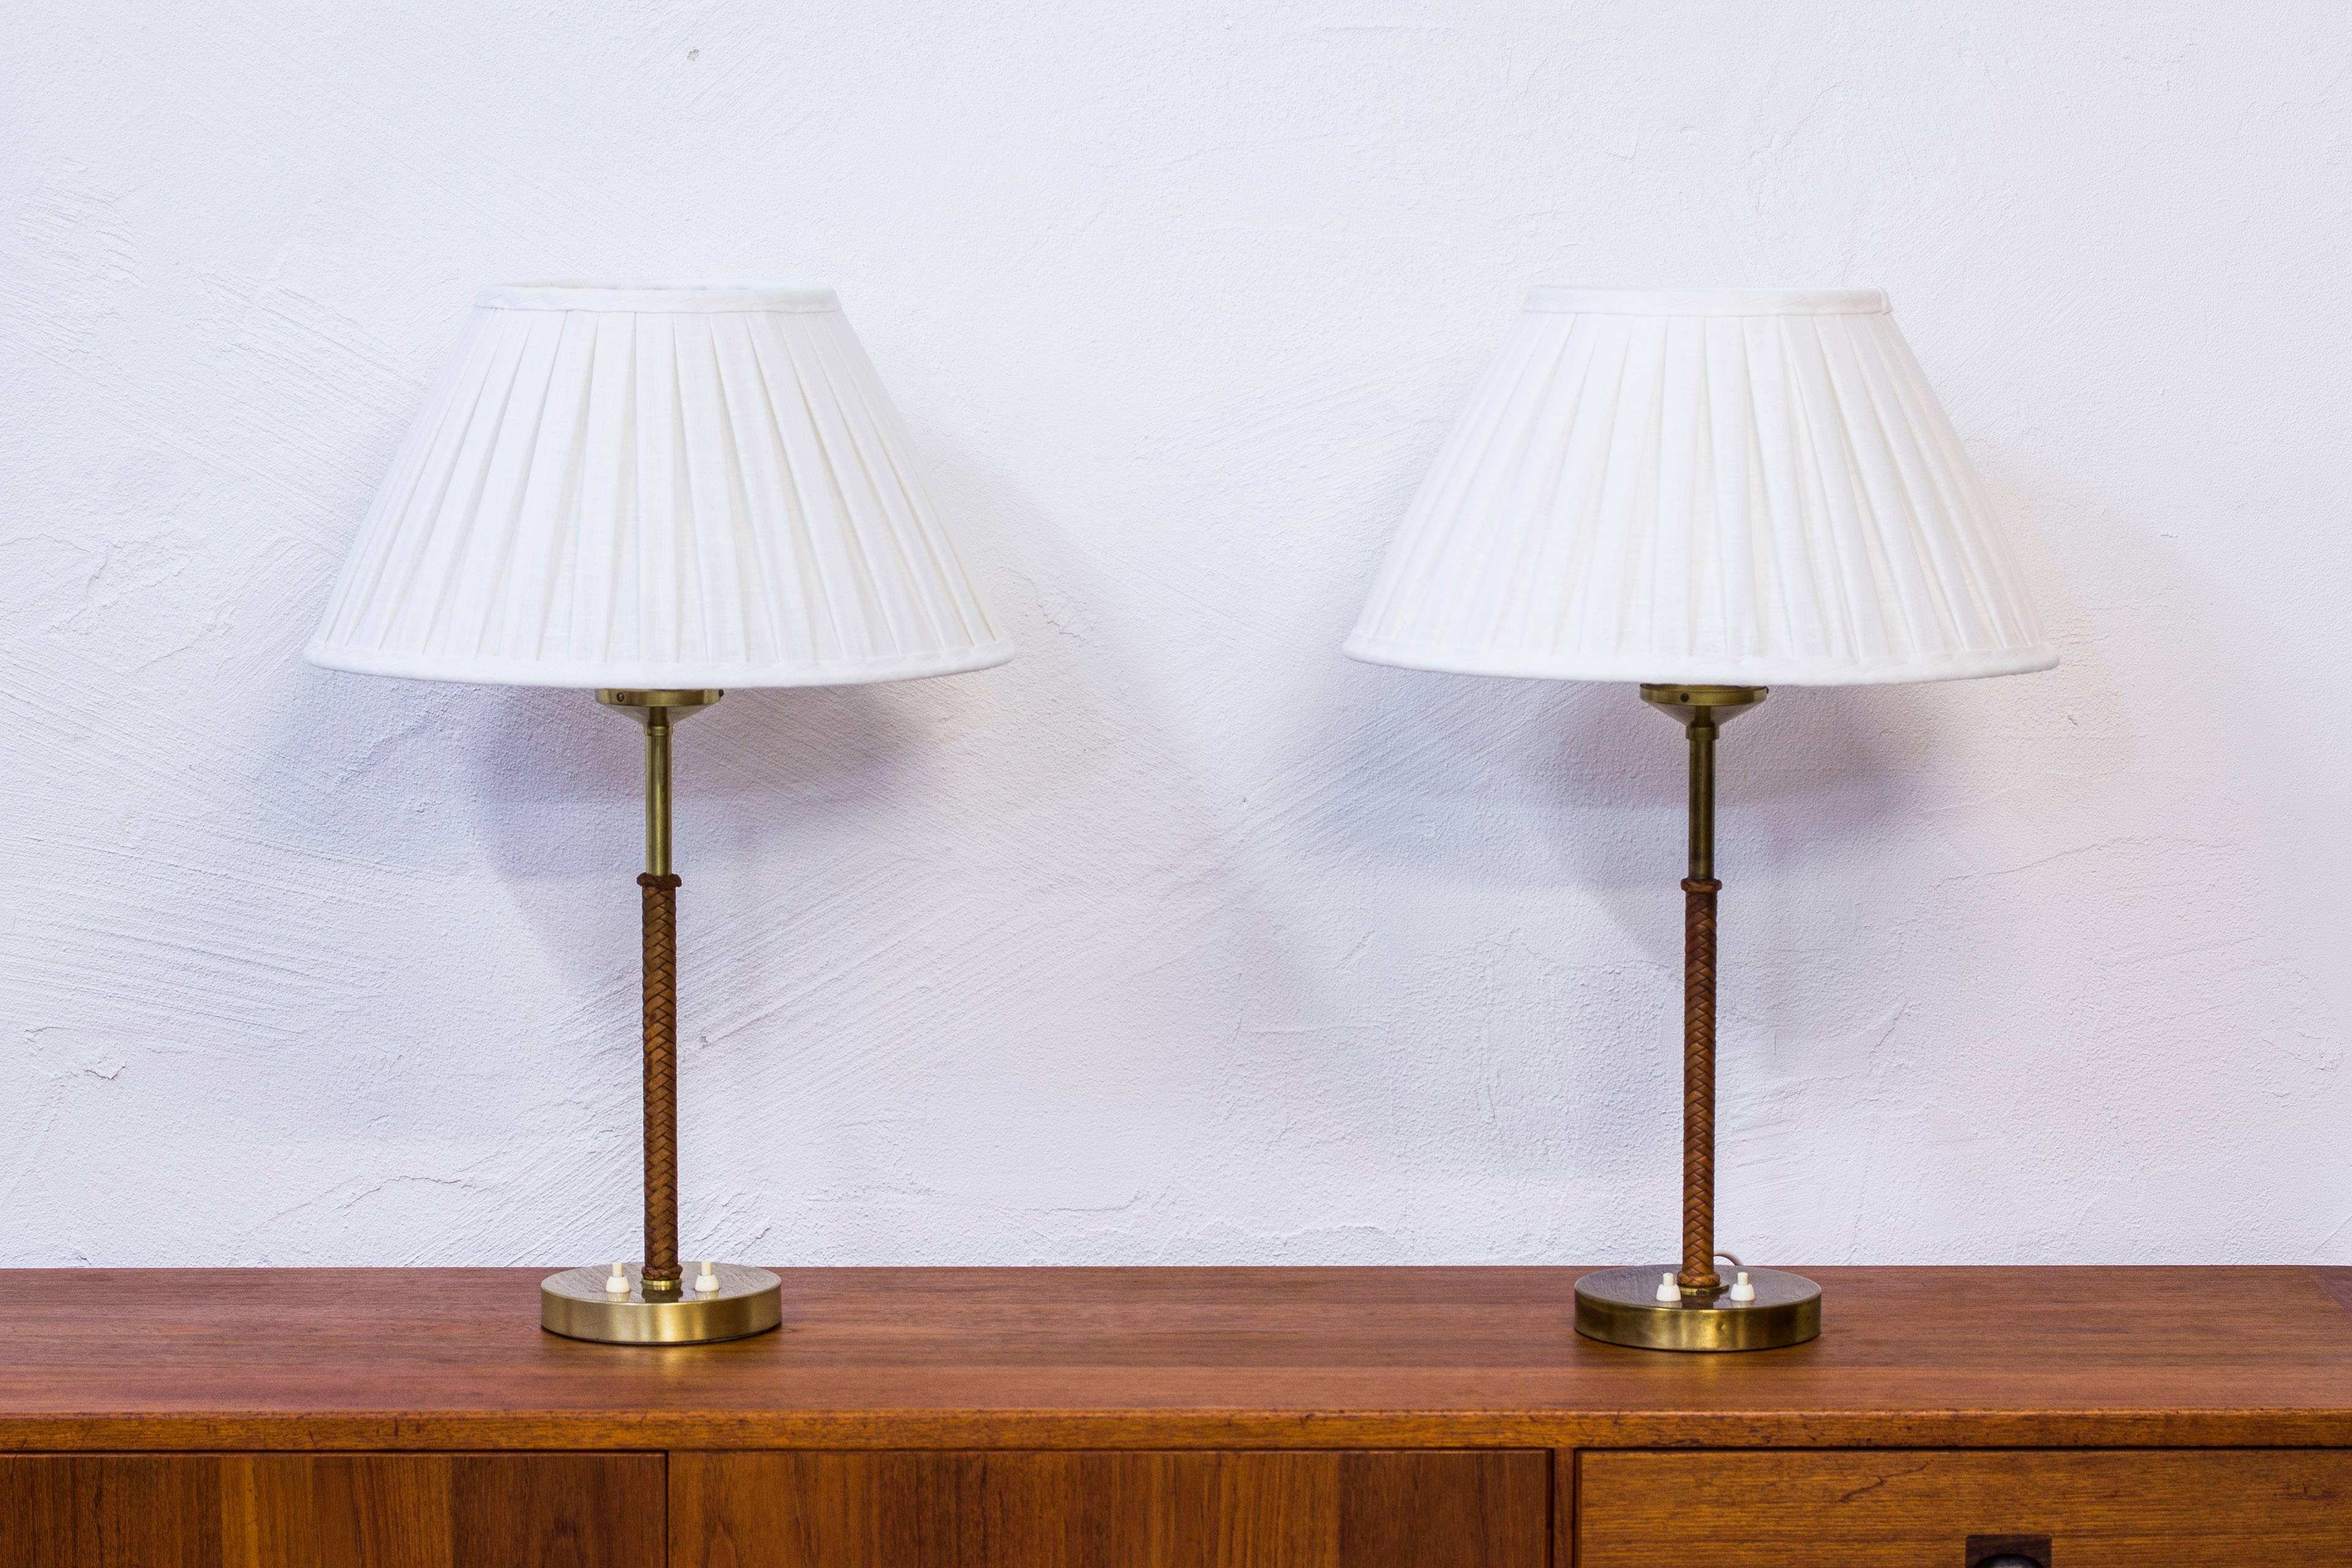 Pair of table lamps model 2043 designed by Åke Hultgren. Produced by Nordiska Kompaniet, NK in Sweden during the 1960s. Made from solid brass with original hand braided leather with patina. Dual light switch to adjust light in three stages, soft,